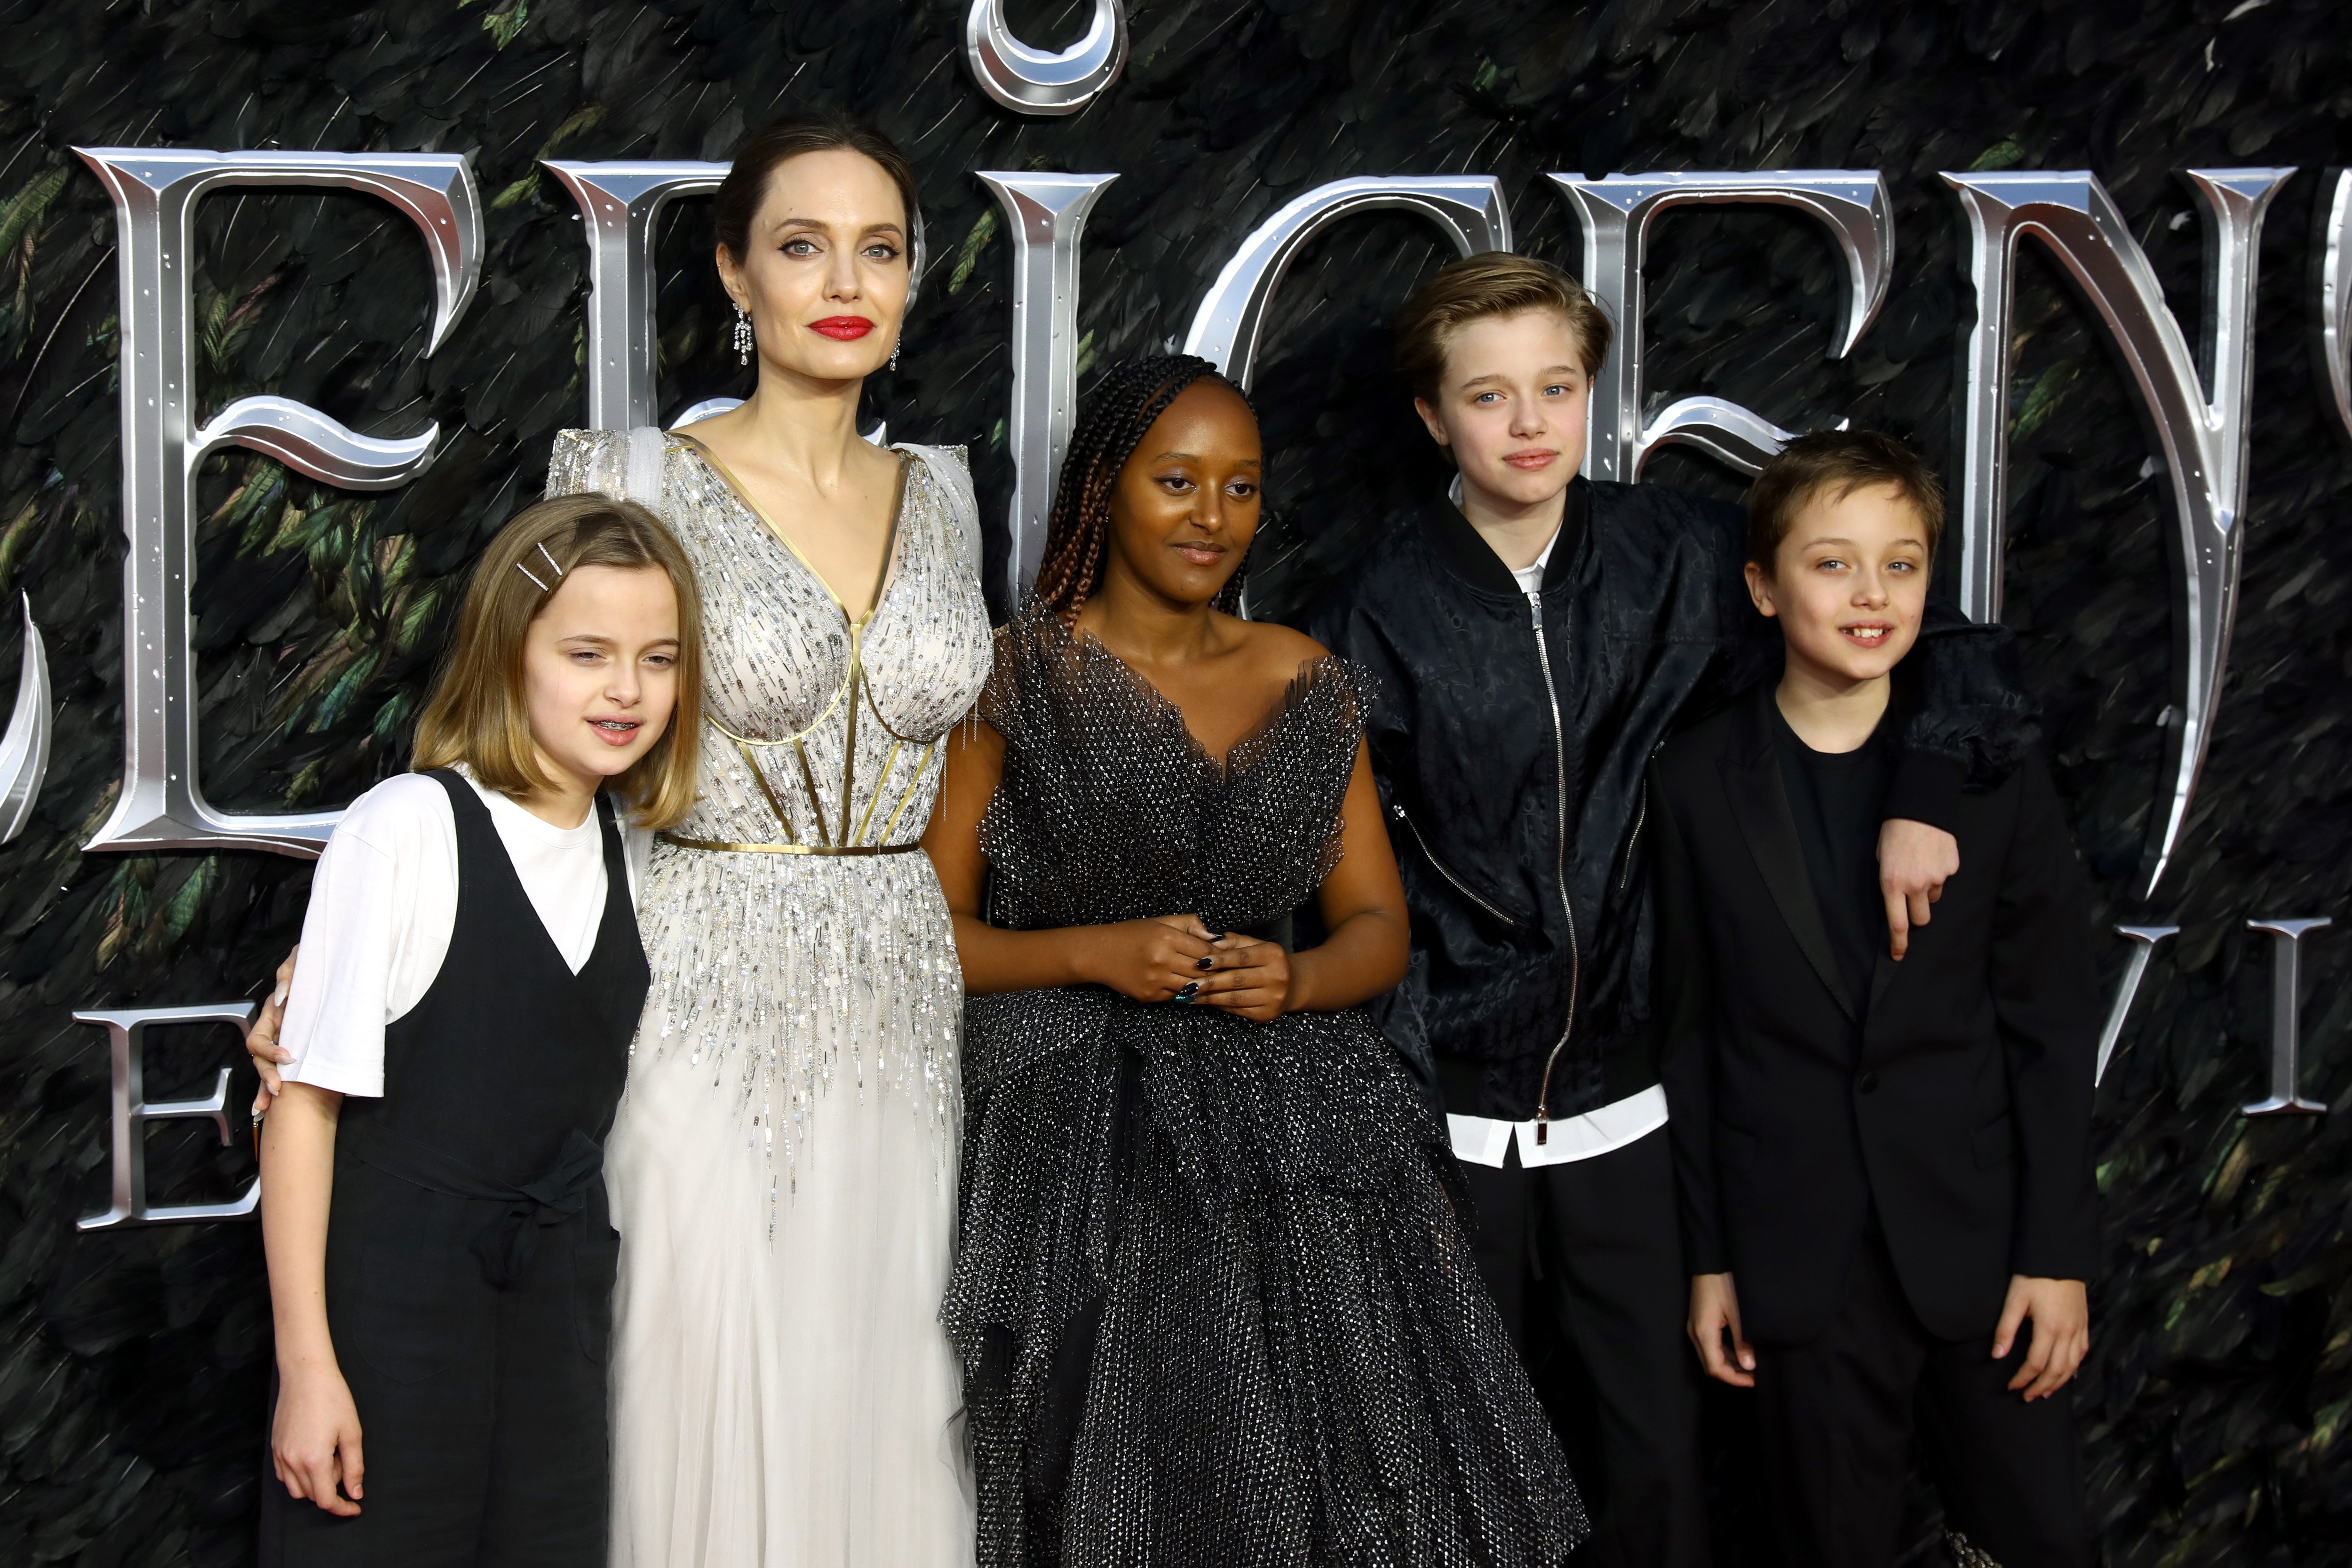 Vivienne Marcheline Jolie-Pitt, Angelina Jolie, Zahara Marley Jolie-Pitt, Shiloh Nouvel Jolie-Pitt and Knox Jolie-Pitt attend the European premiere of "Maleficent: Mistress of Evil" at Odeon IMAX Waterloo on October 09, 2019 in London, England. | Source: Getty Images